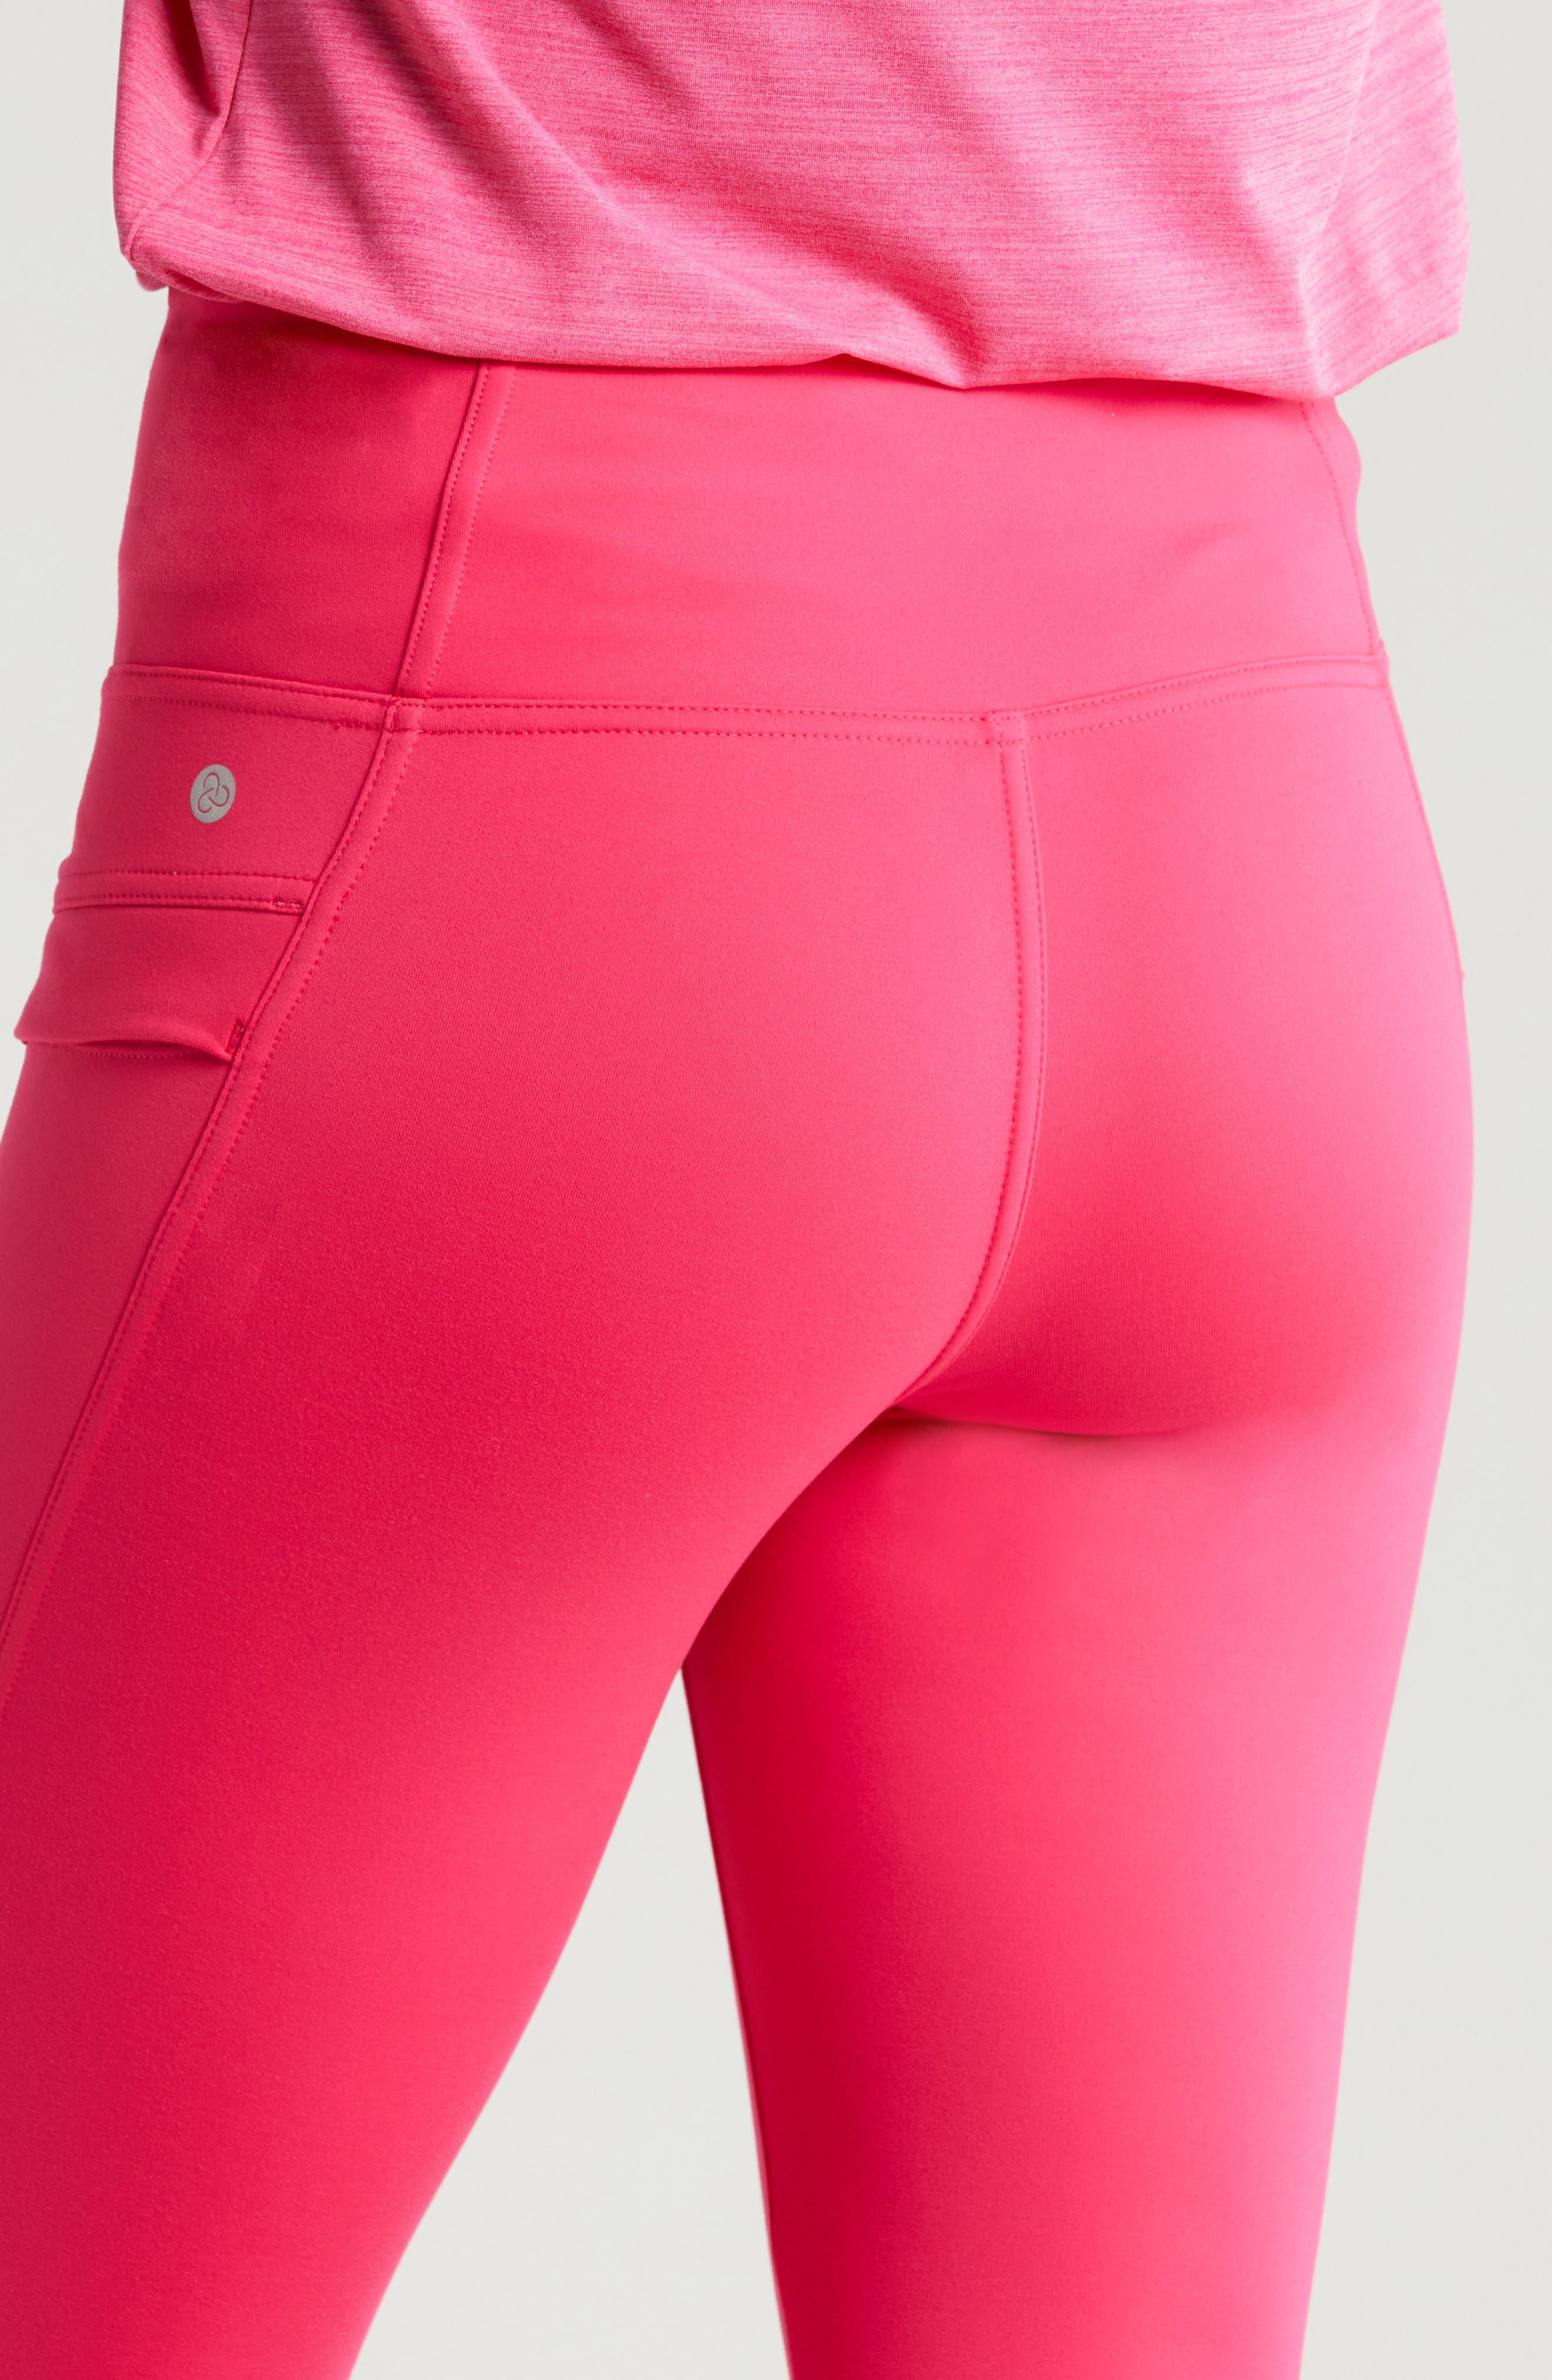 Hot Pink and Bright Green Flow Leggings With Pockets 